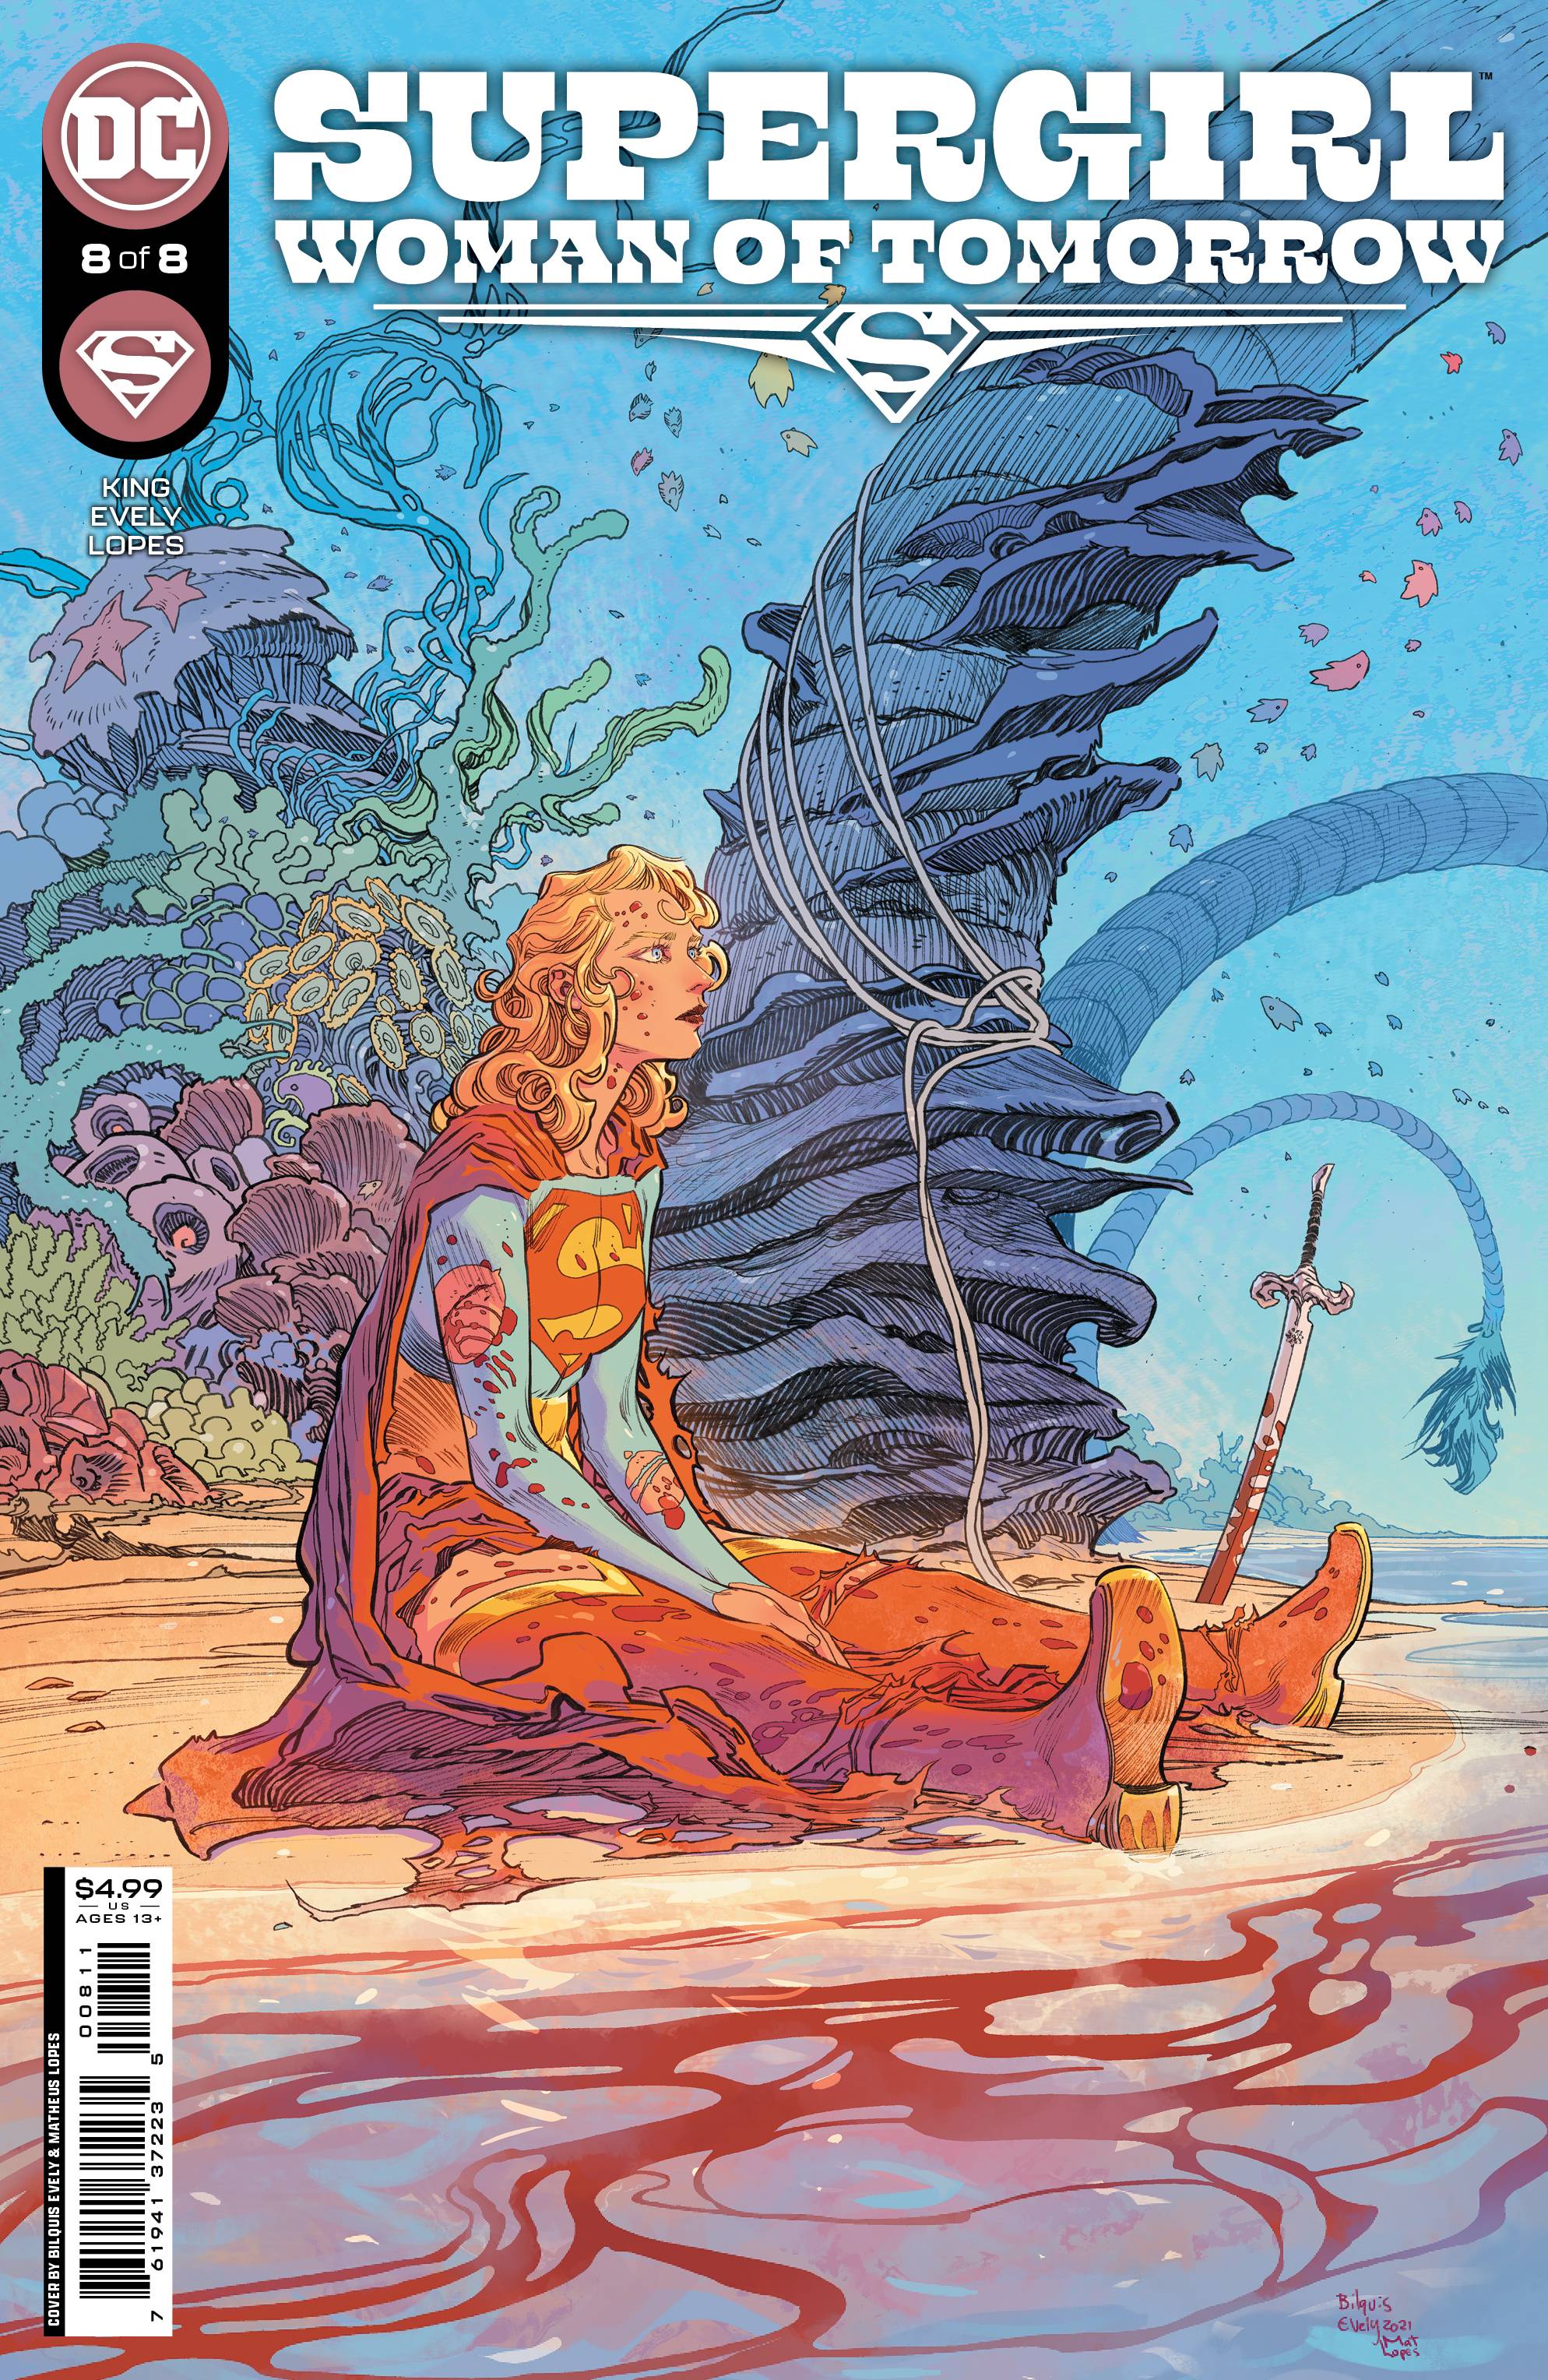 SUPERGIRL WOMAN OF TOMORROW #8 (OF 8) CVR A EVELY